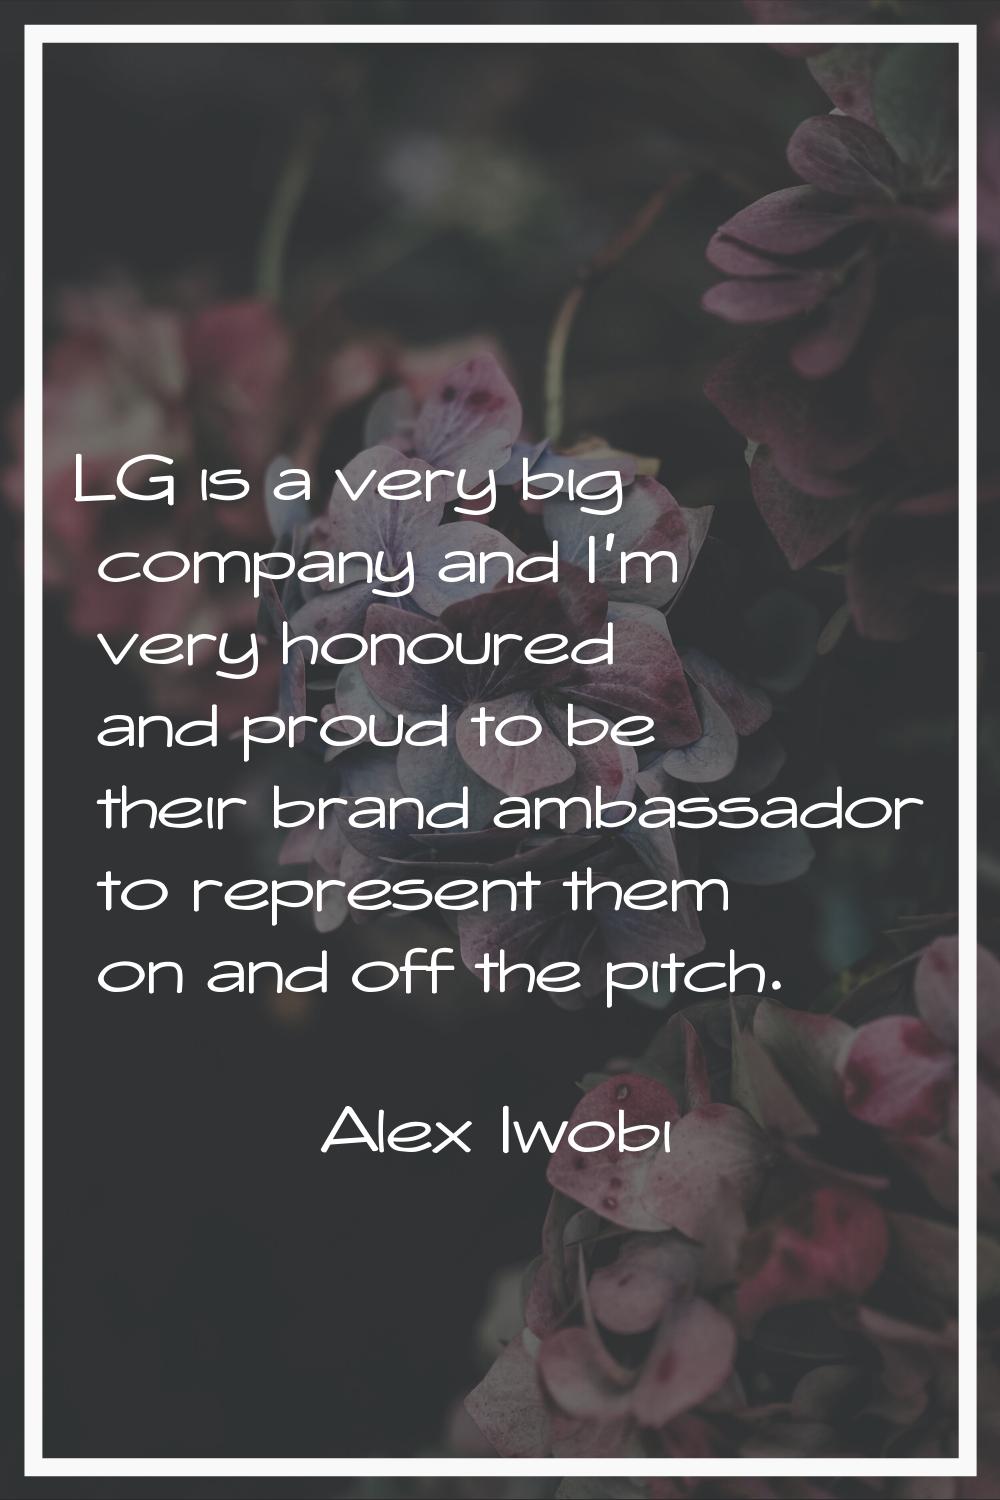 LG is a very big company and I'm very honoured and proud to be their brand ambassador to represent 